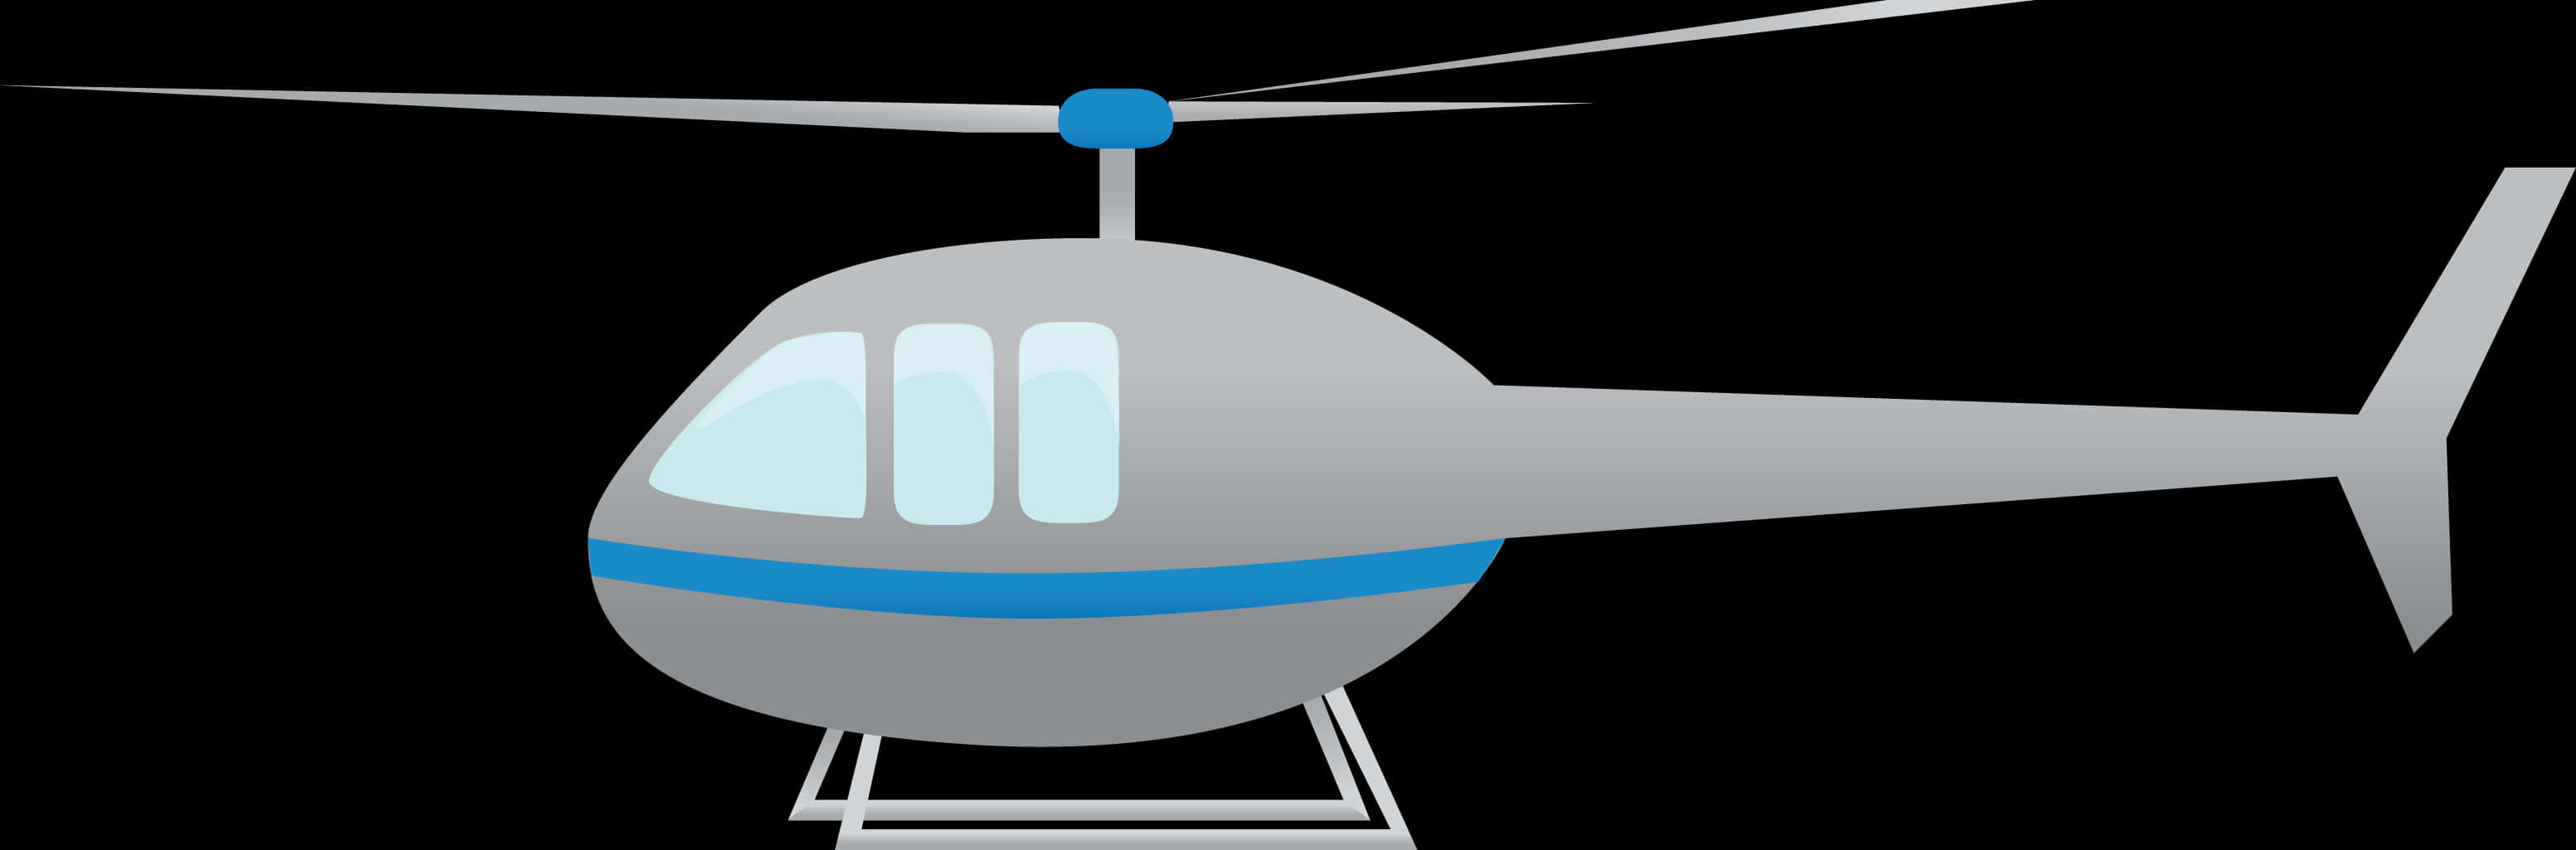 Helicopter Silhouette Graphic PNG